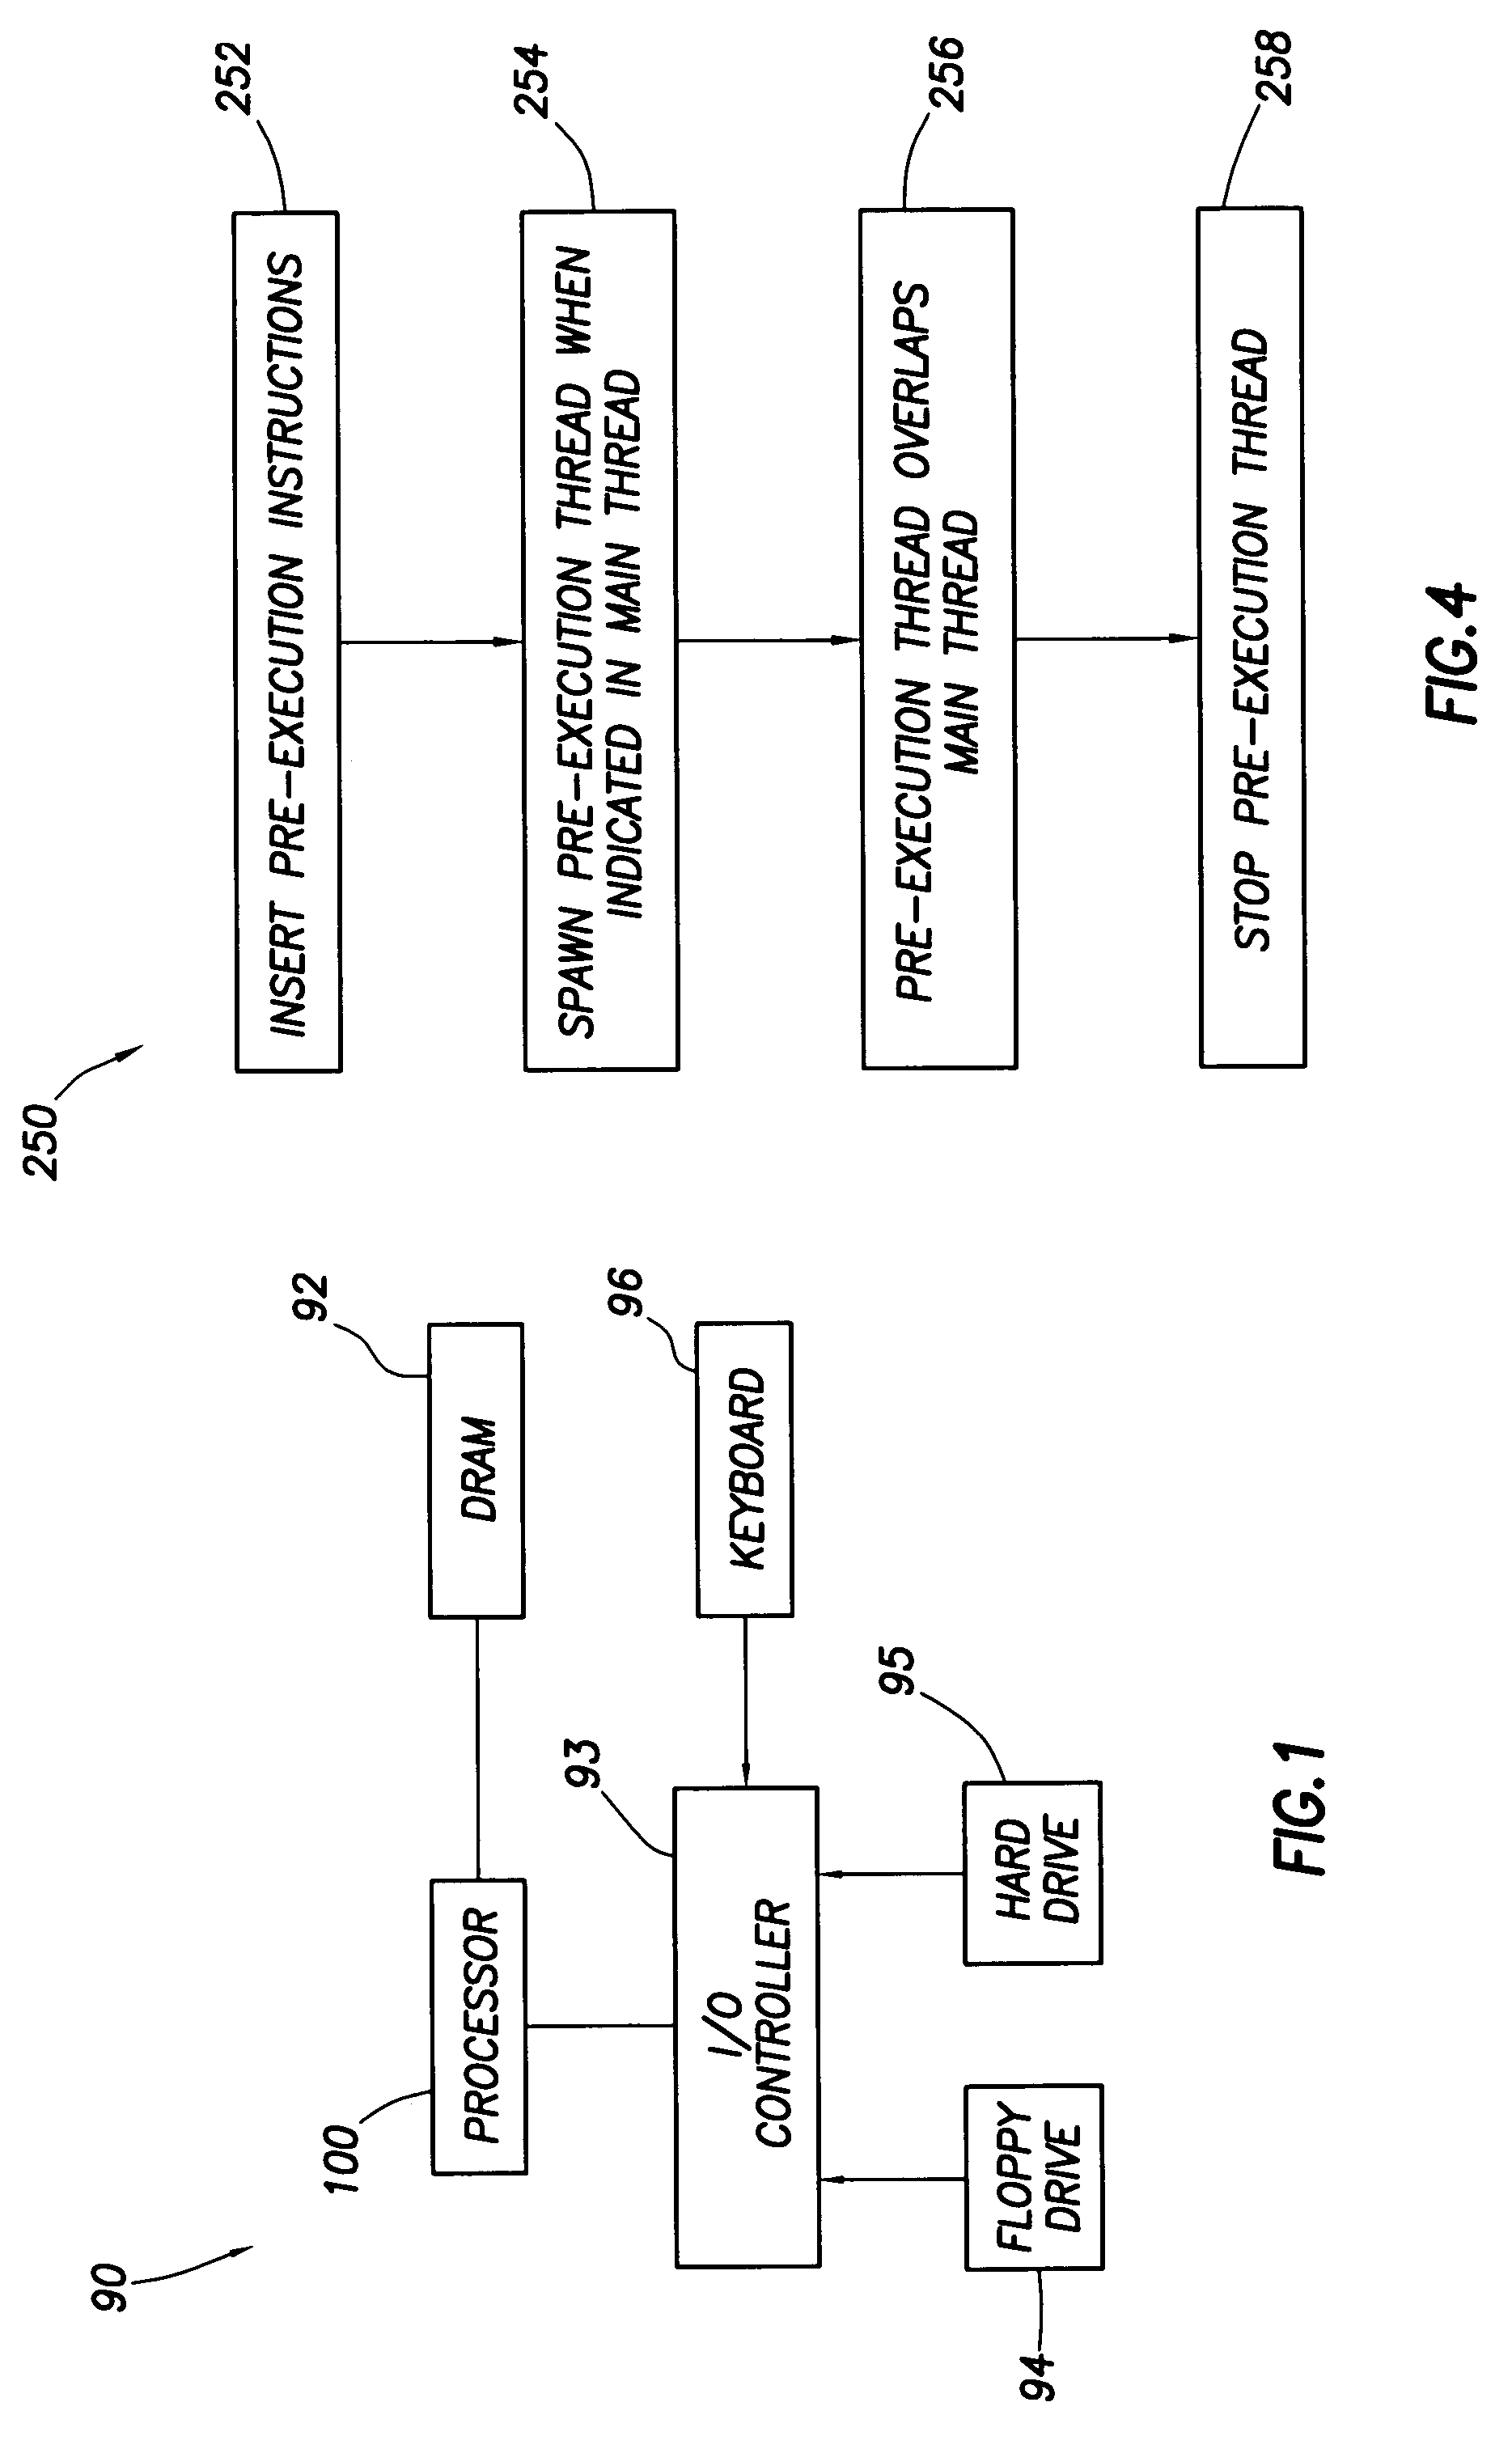 Software controlled pre-execution in a multithreaded processor